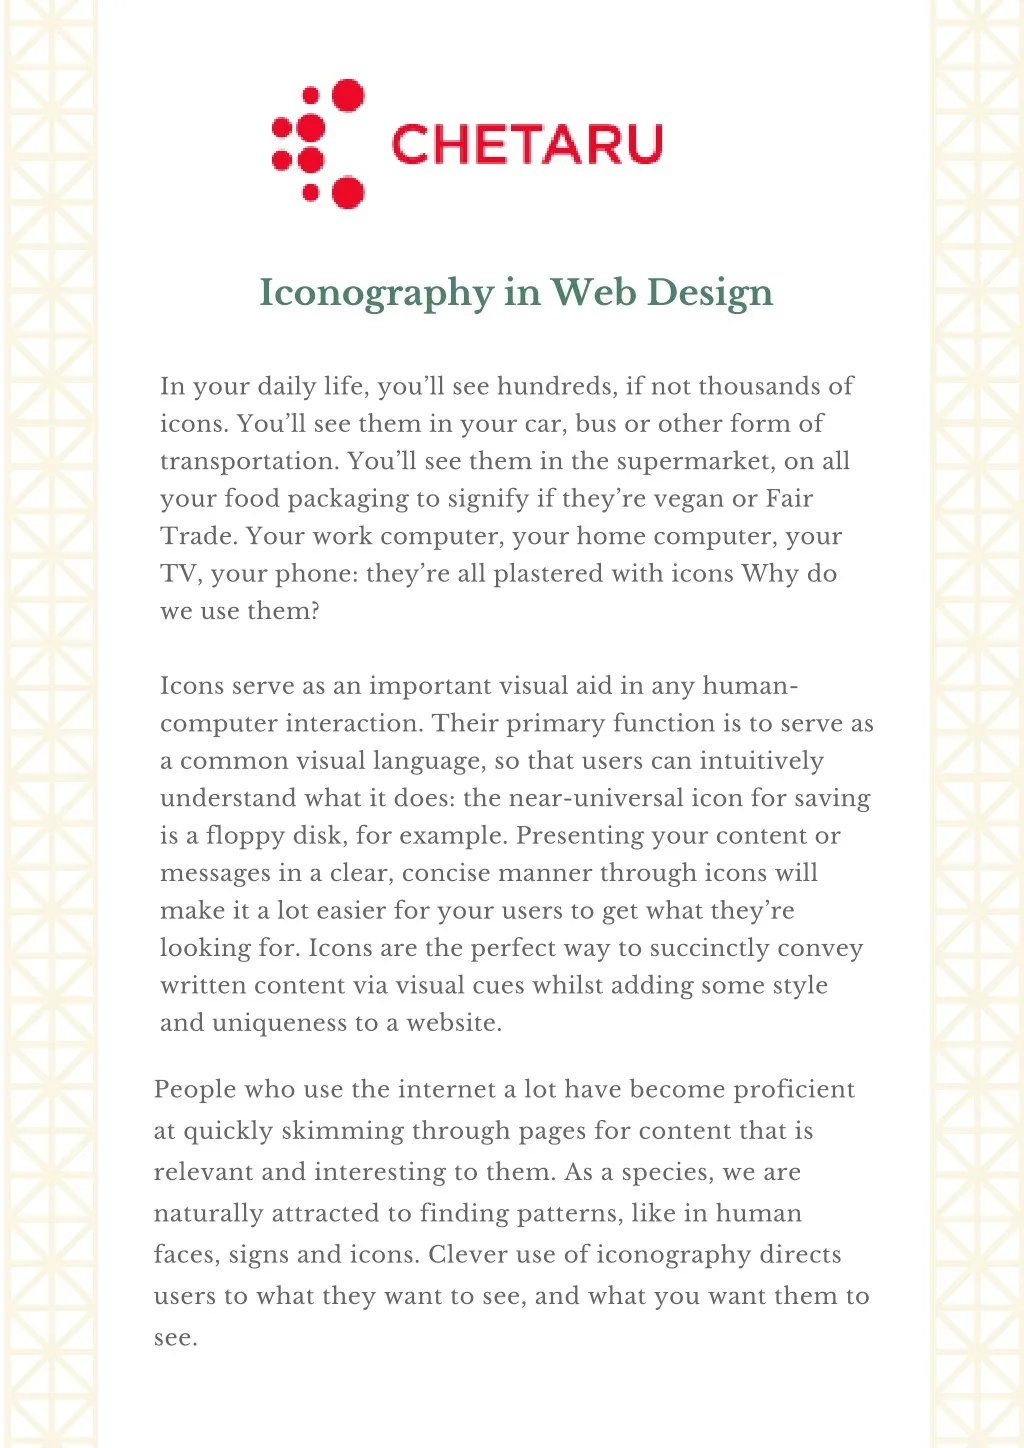 iconography in web design